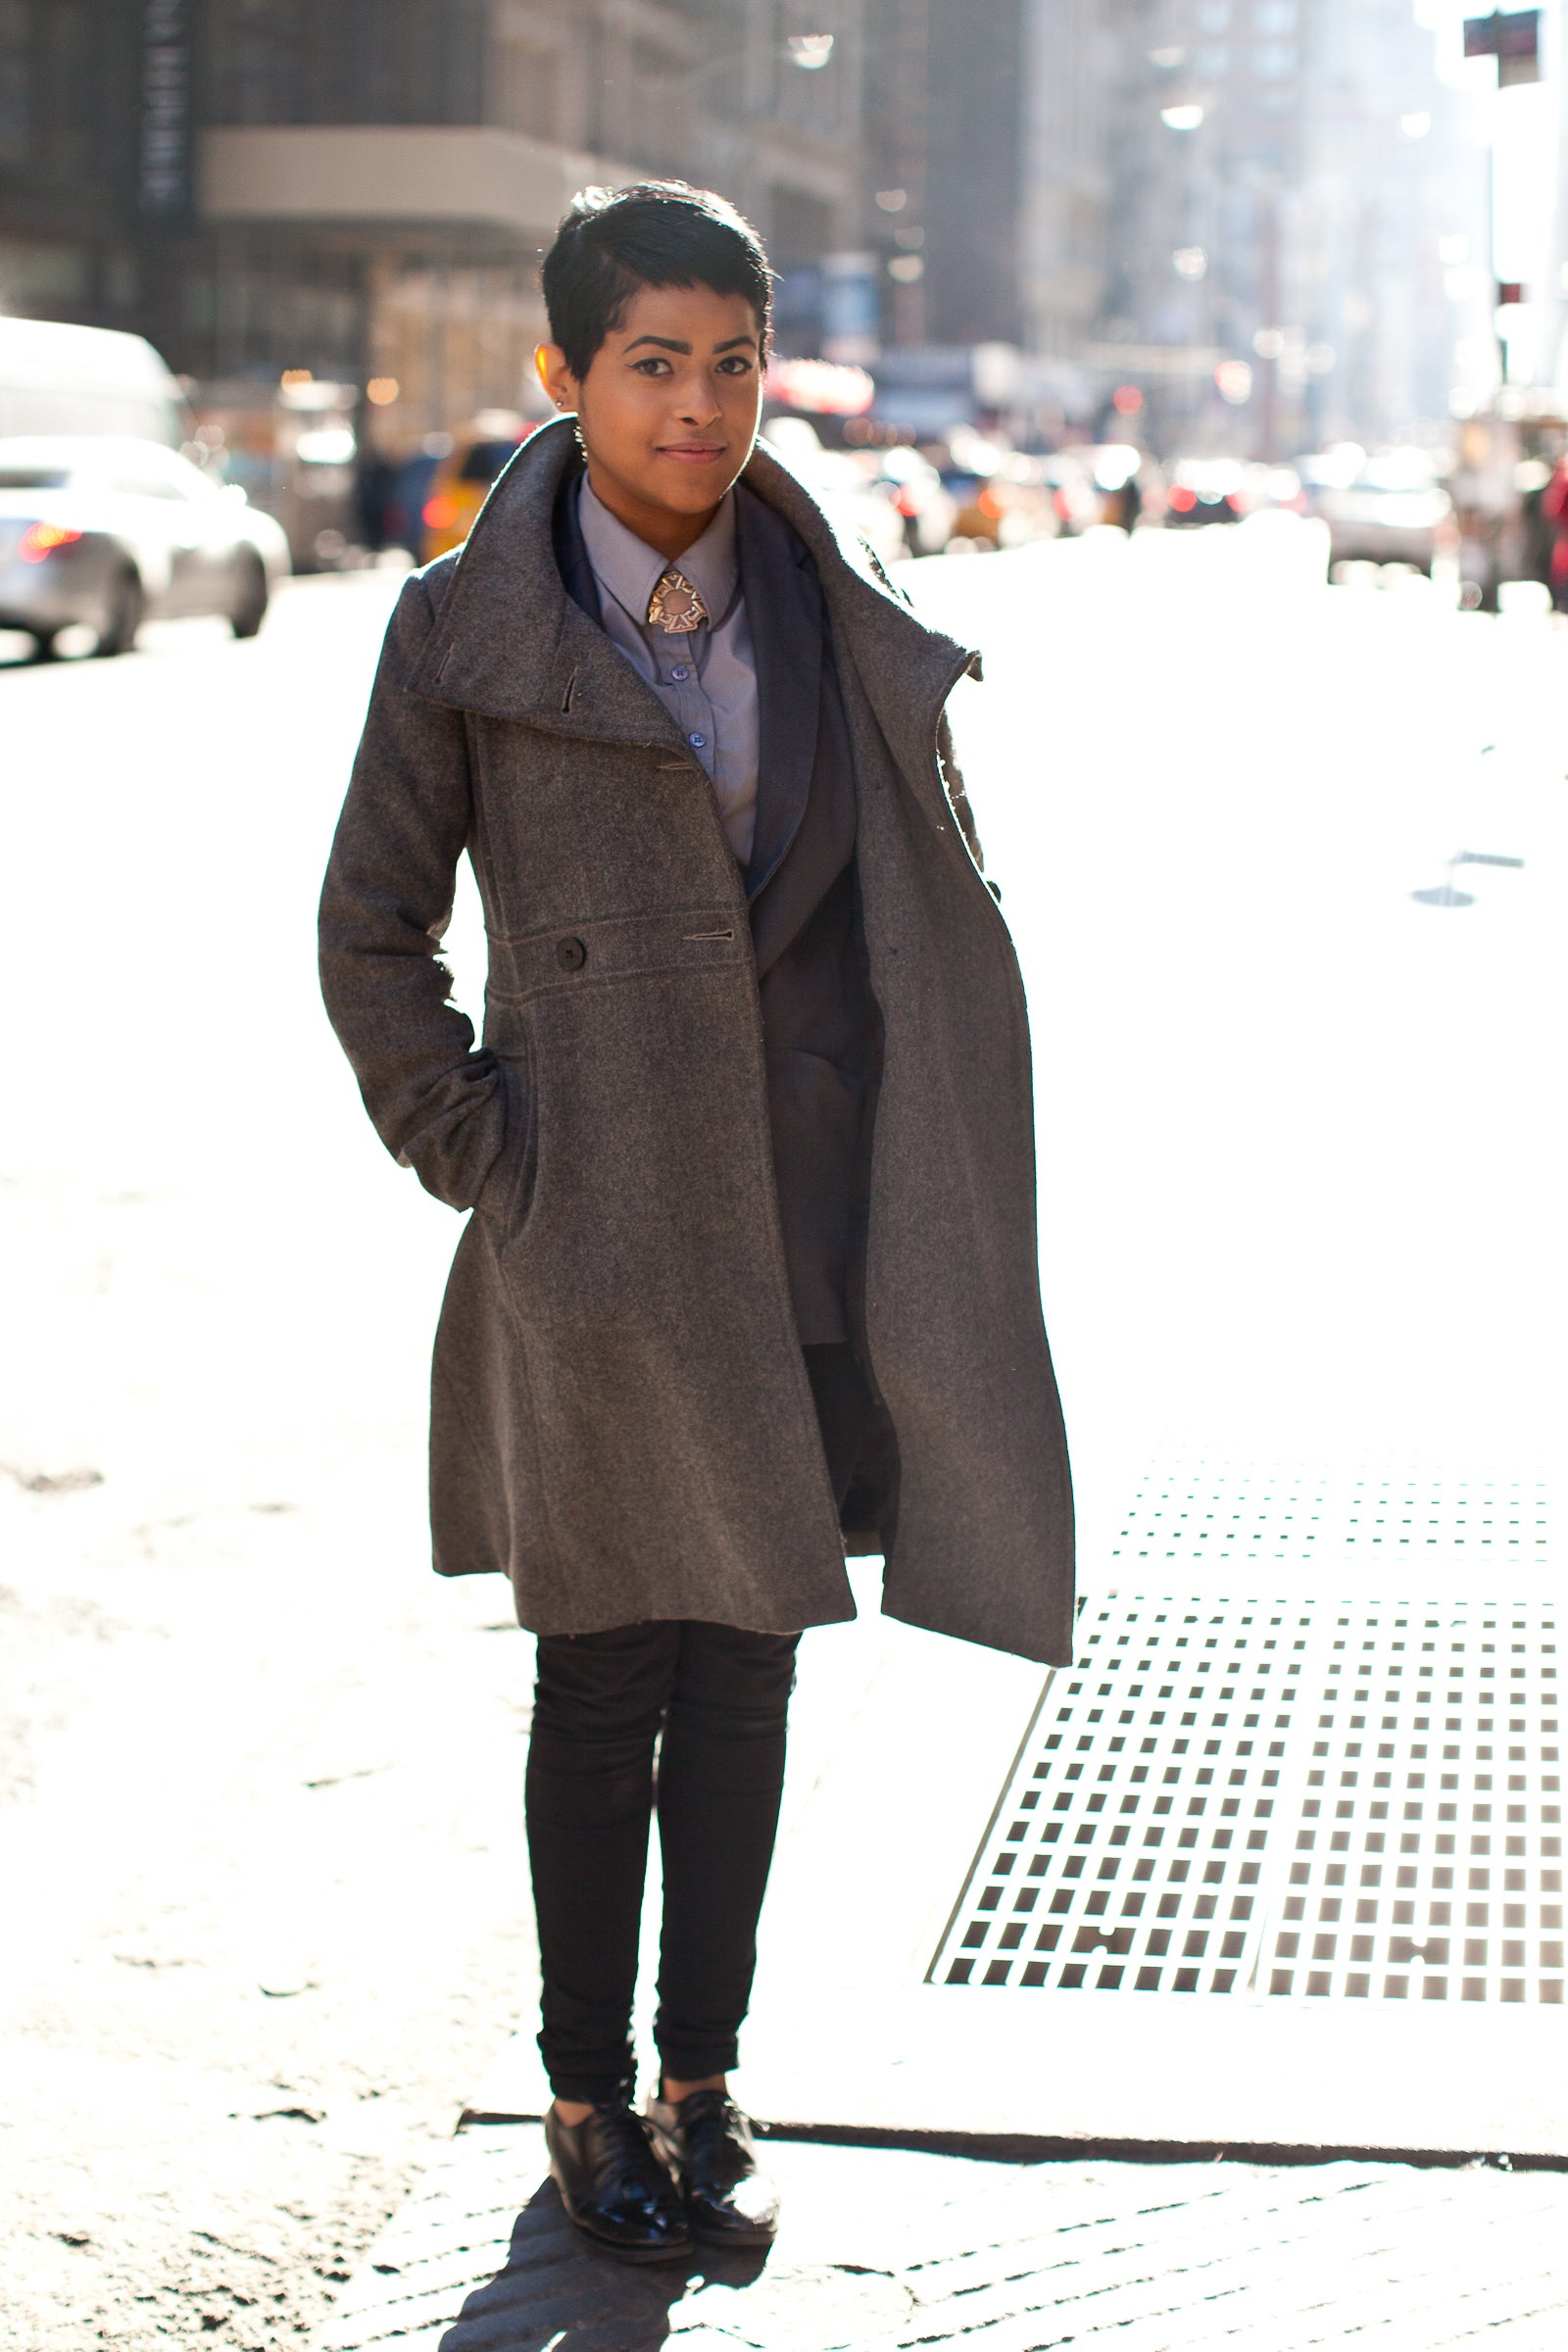 Street Style: New York to D.C.